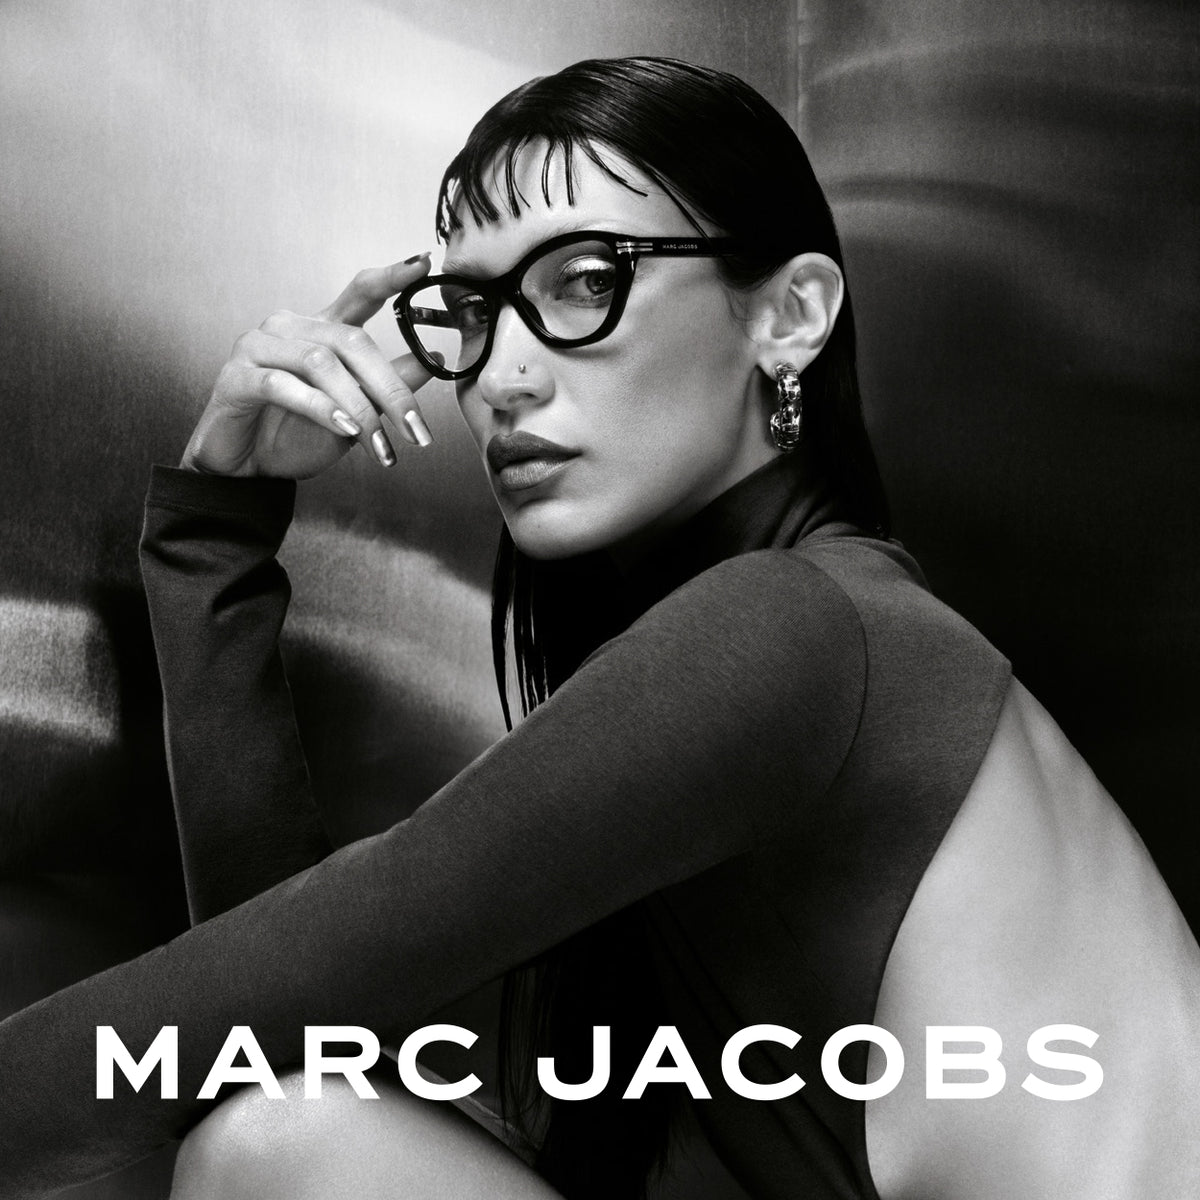 Marc Jacobs Optical – Mellins iStyle